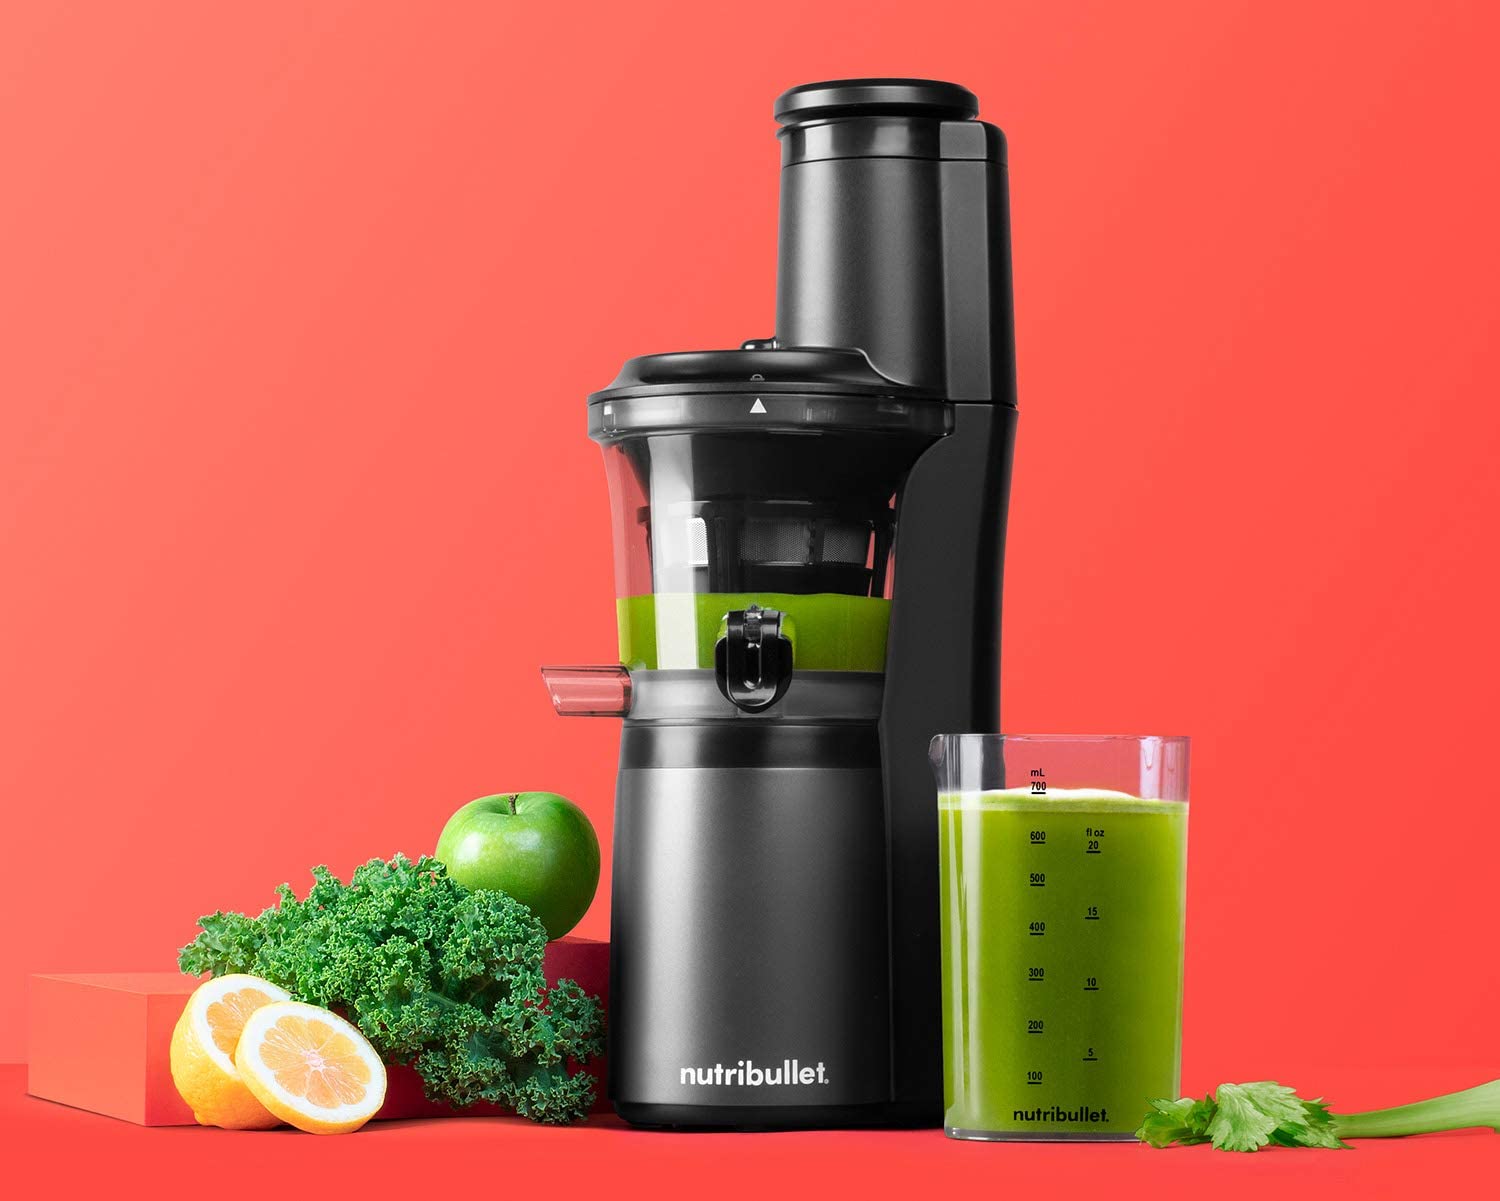 Vegetable and Fruit Juice Extractor BPA-Free Dry Pulp Dishwasher Safe 2021 Masticating Juicers for Leafy Greens Tomato Celery Carrot Wheatgrass Cold Press Slow Juicer Machine Quiet Motor Easy Clean 